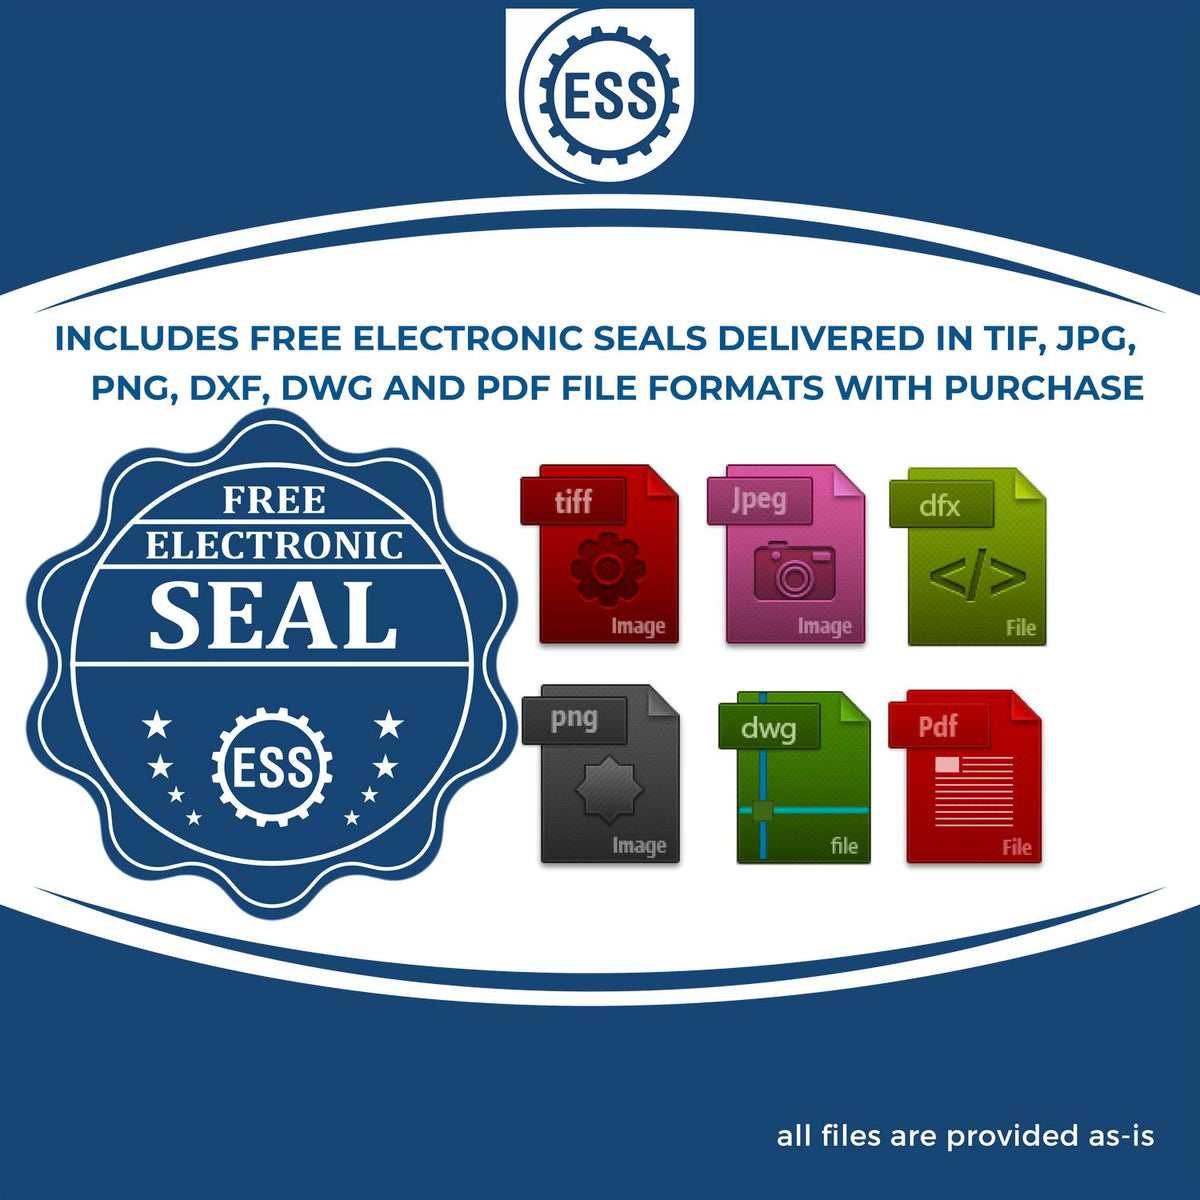 An infographic for the free electronic seal for the Slim Pre-Inked Guam Architect Seal Stamp illustrating the different file type icons such as DXF, DWG, TIF, JPG and PNG.